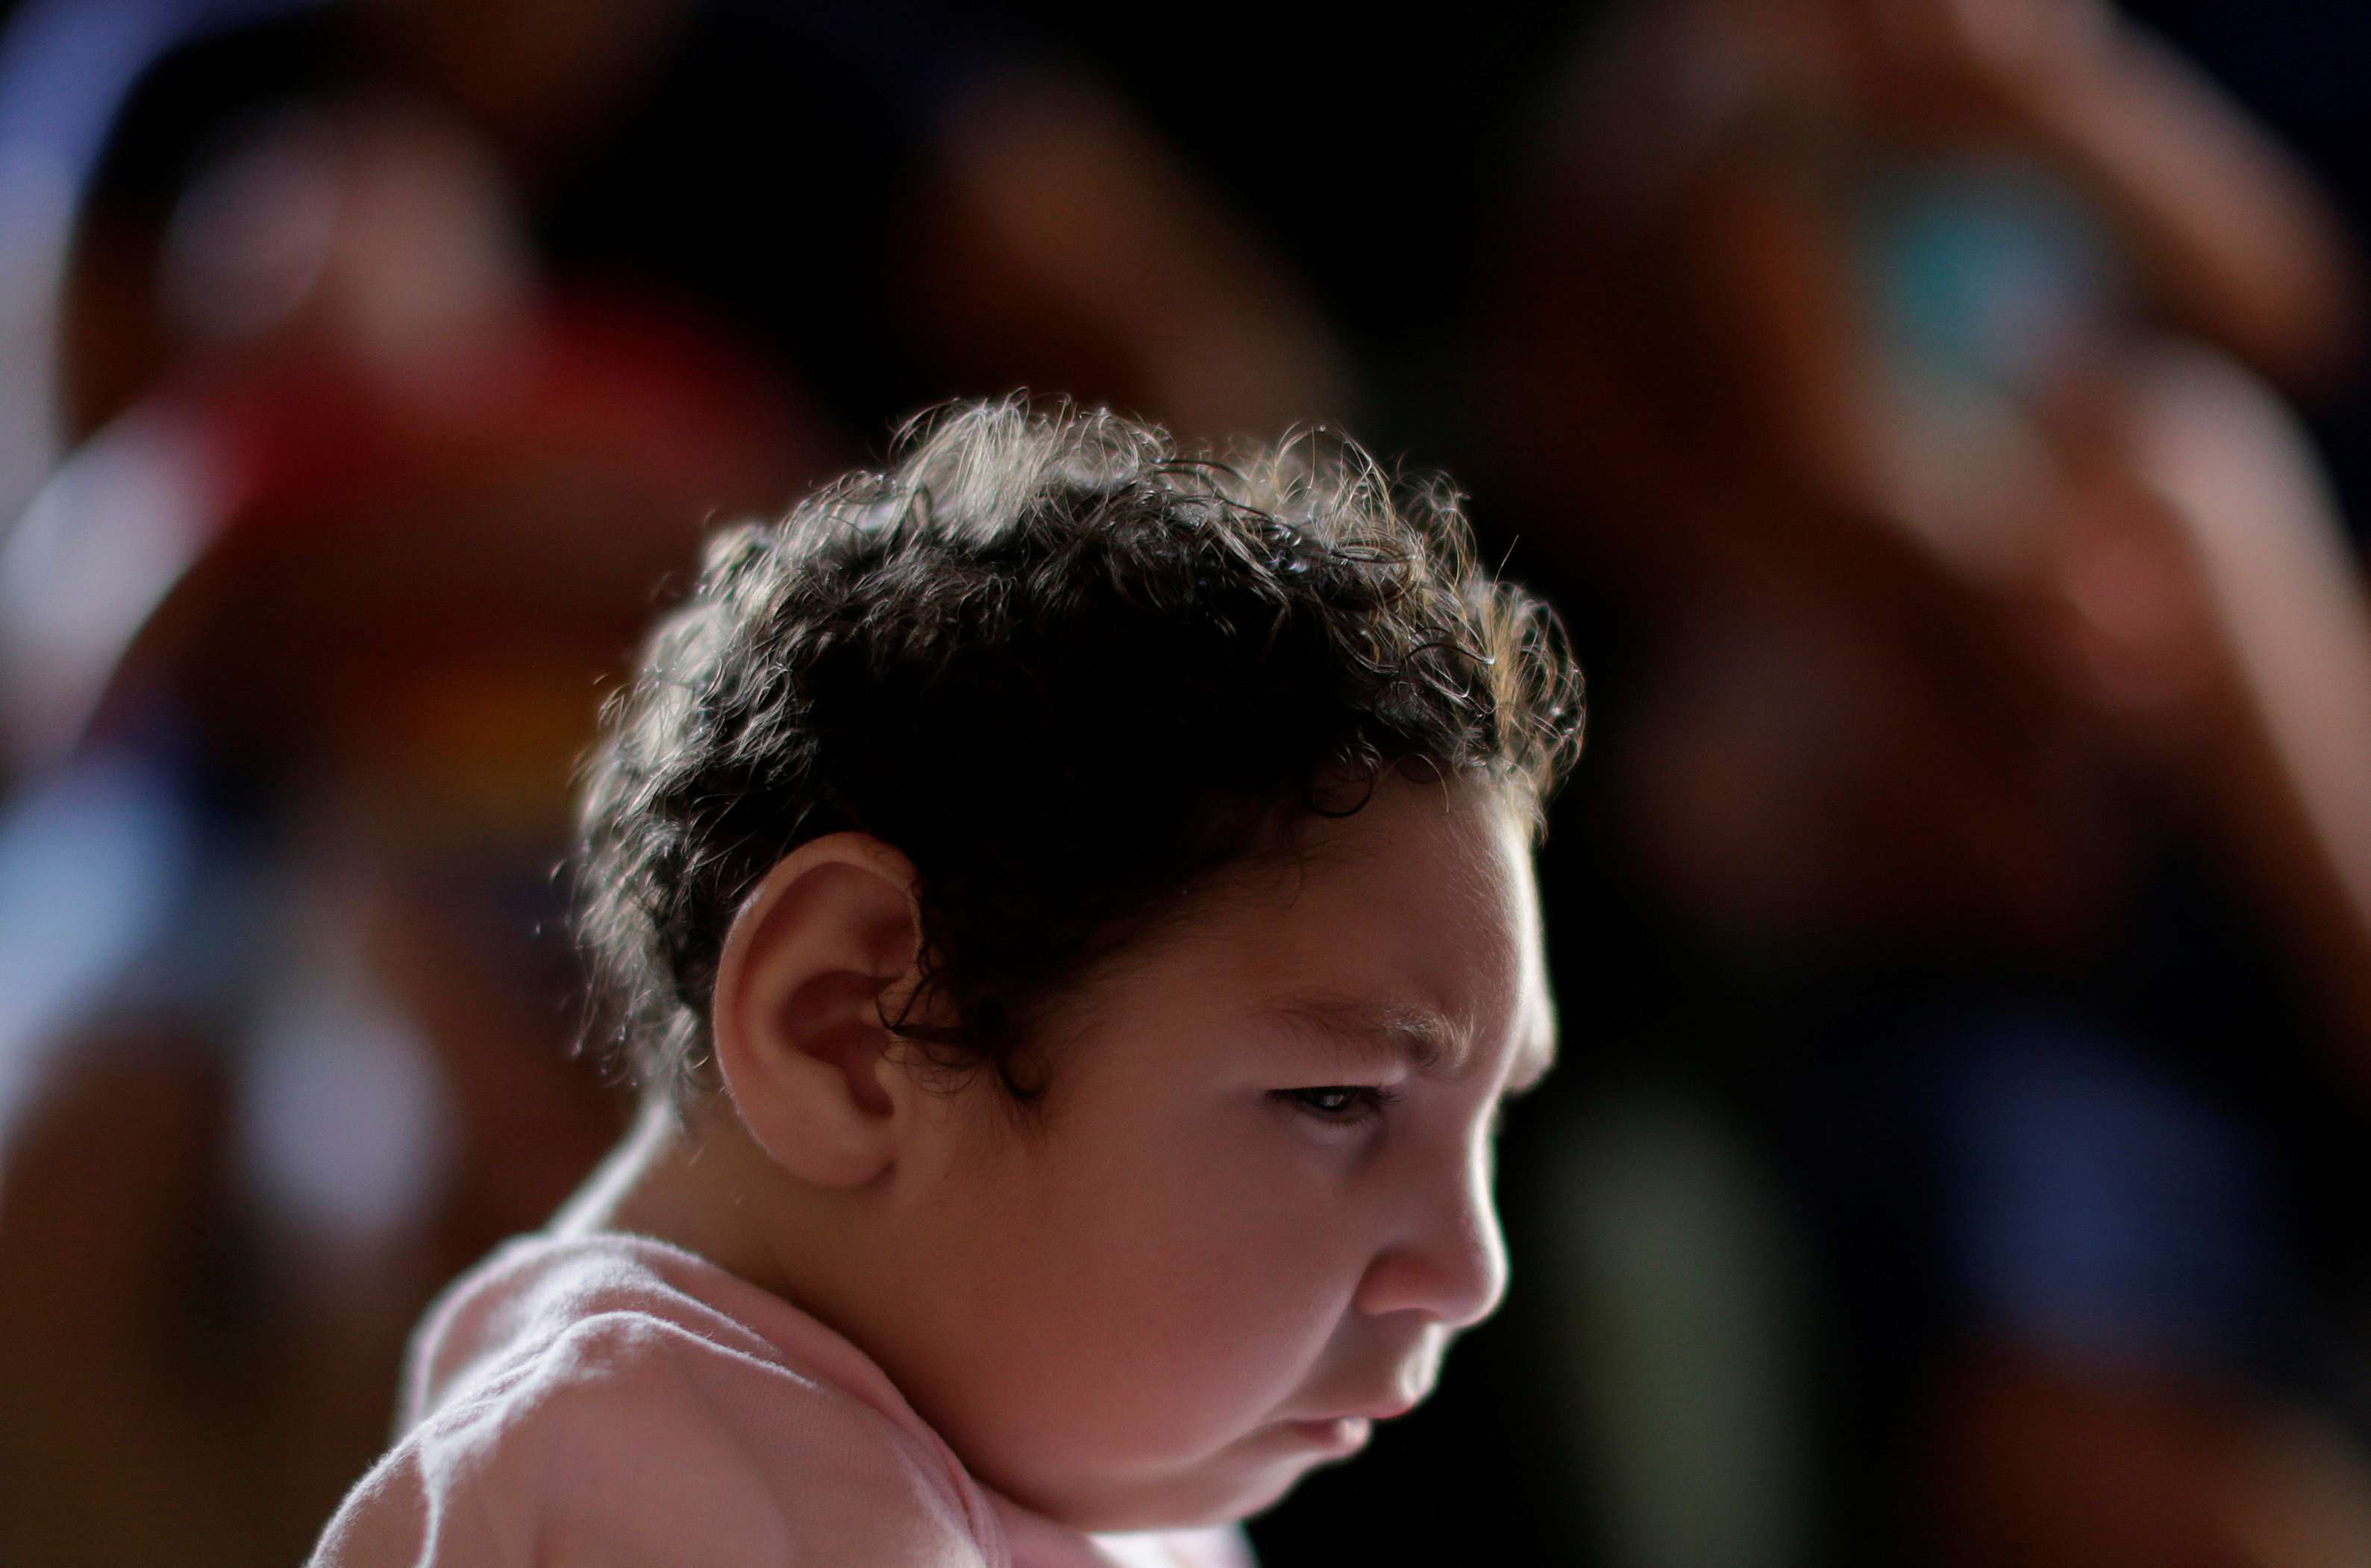 Heloisa, who has a twin sister named Heloa, both 10 months old and both born with microcephaly, is pictured at her house in Areia, Paraiba state, Brazil, on February 8. Photo: Reuters